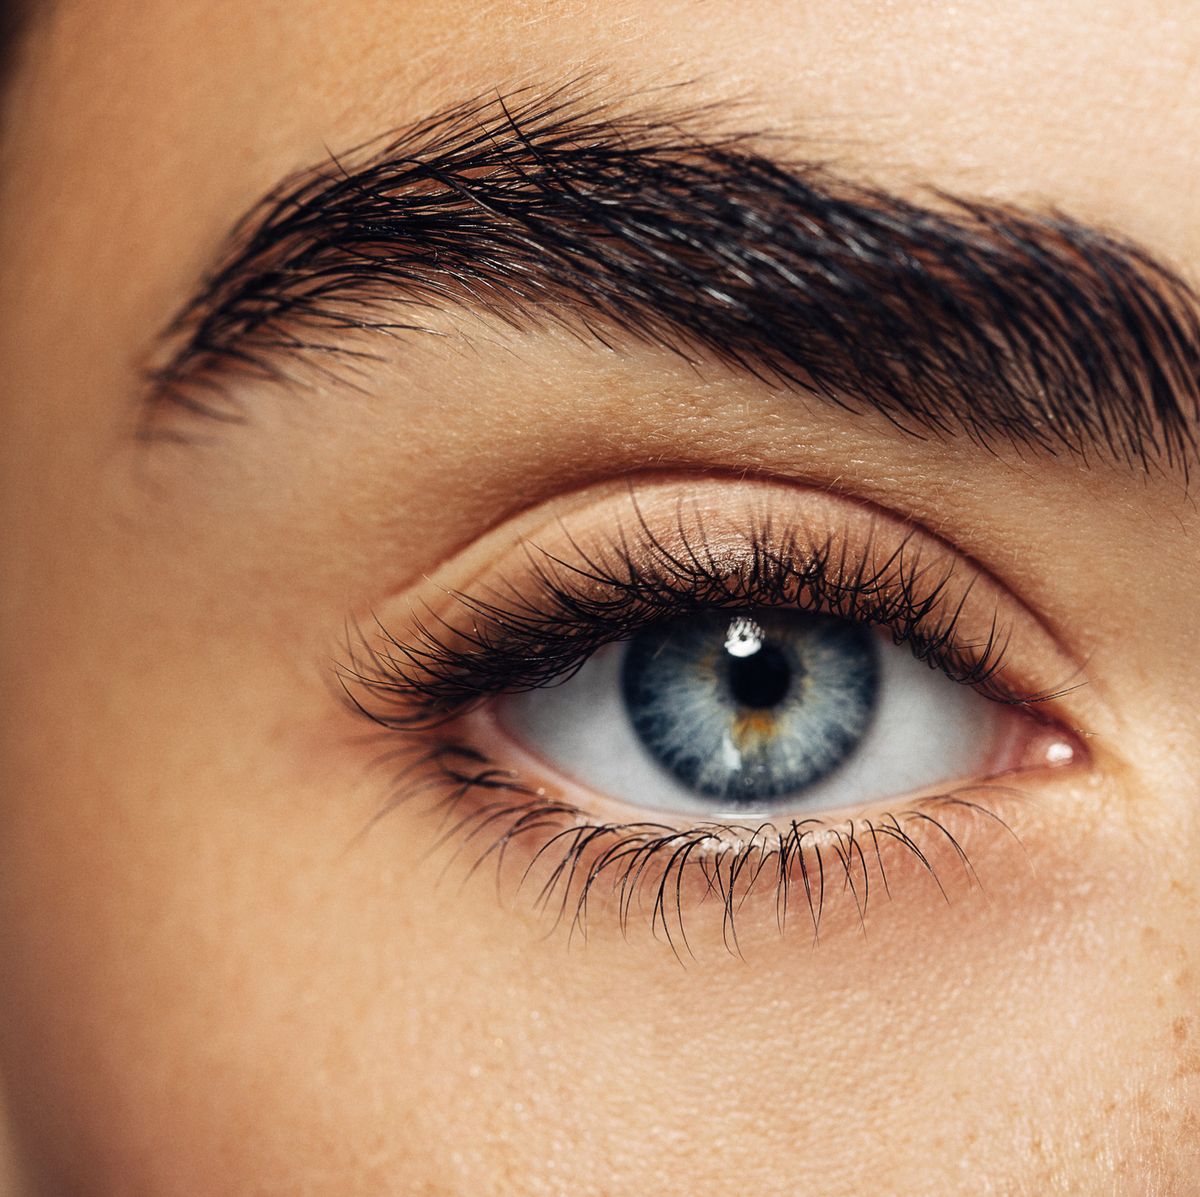 How To Find The Right Colour Eyebrow Make-Up - Tips For Matching